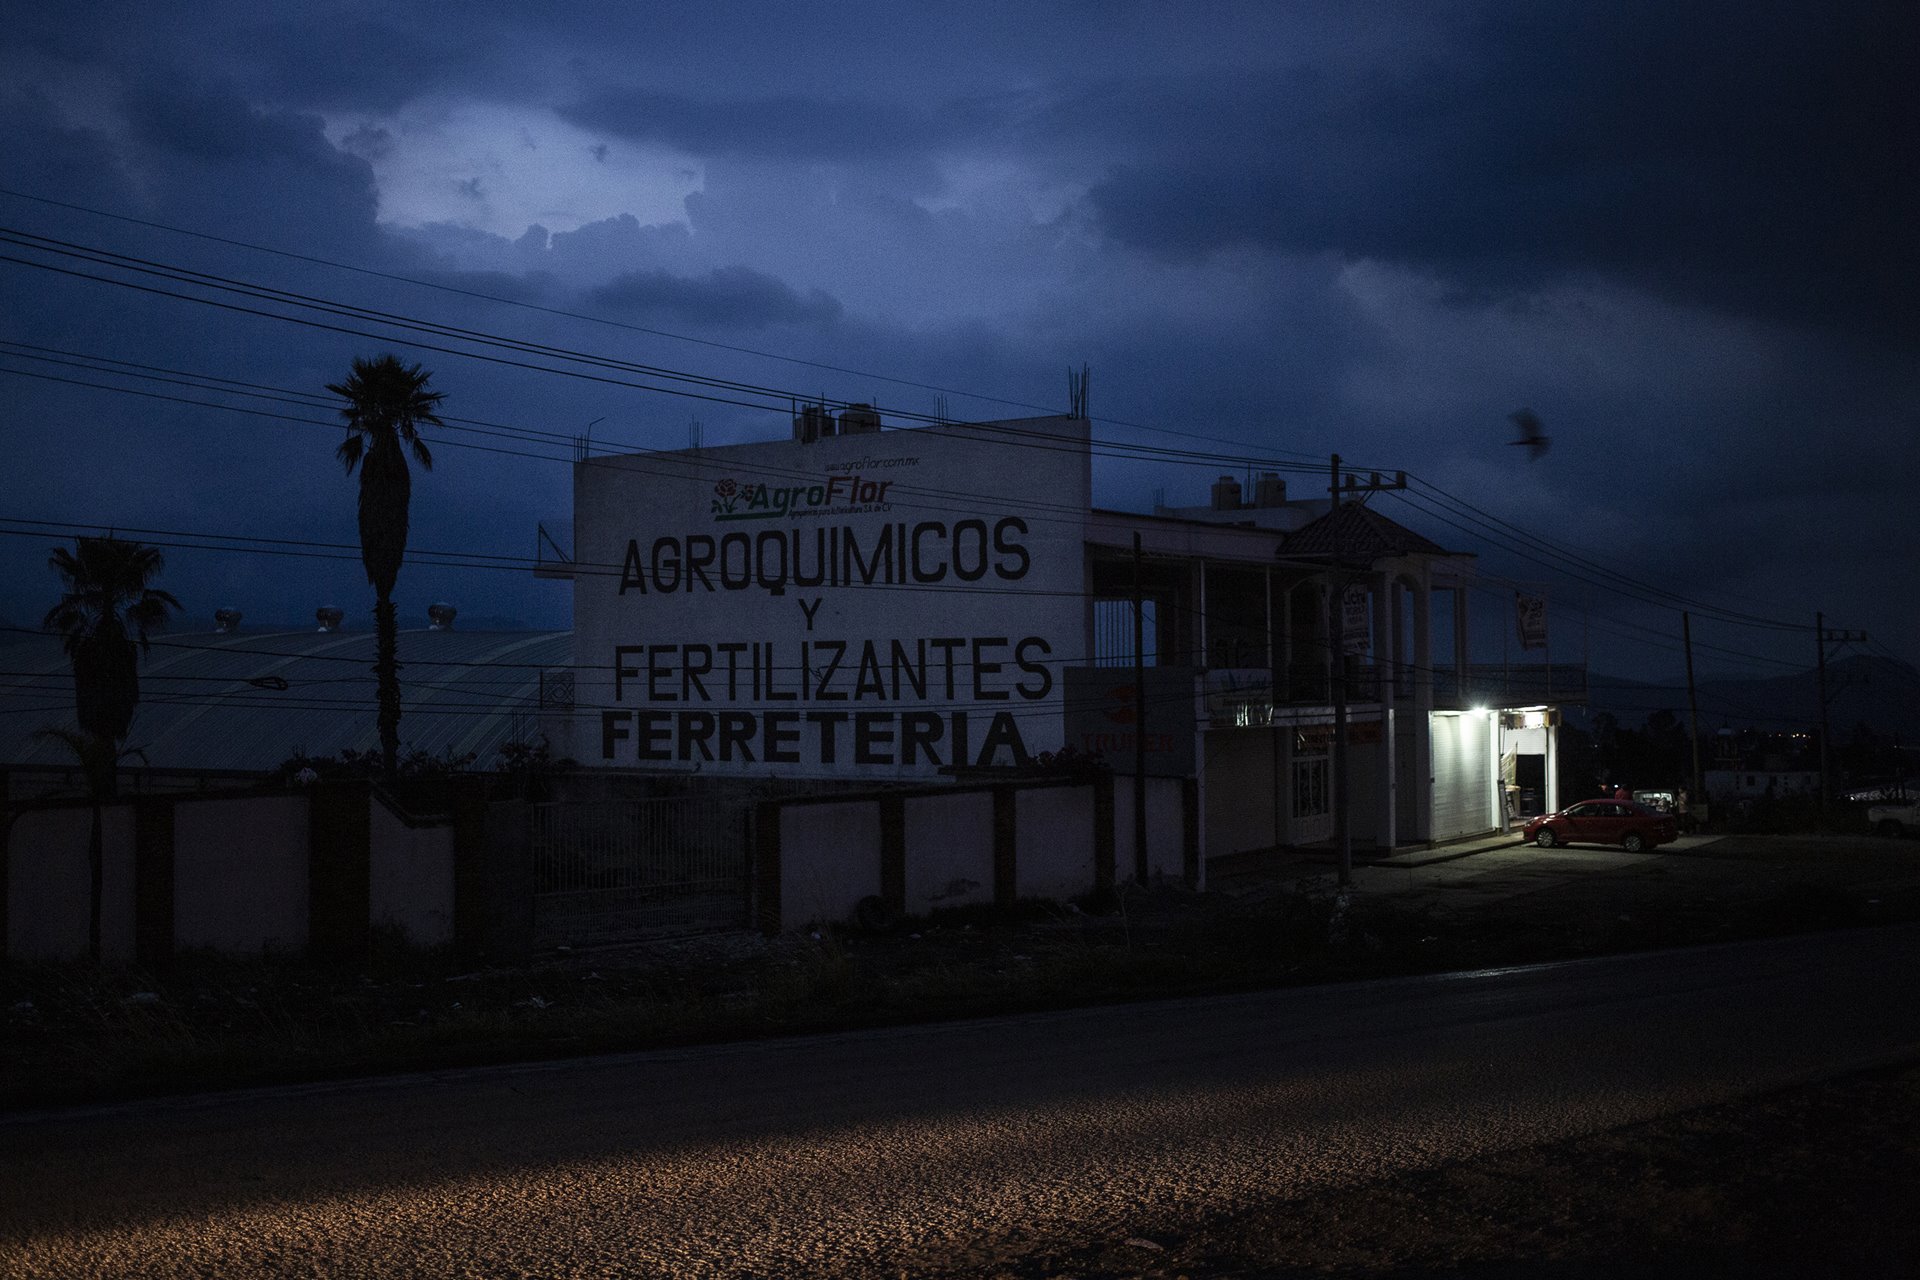 Another day dawns at one of the many agrichemical stores in Villa Guerrero, Mexico.